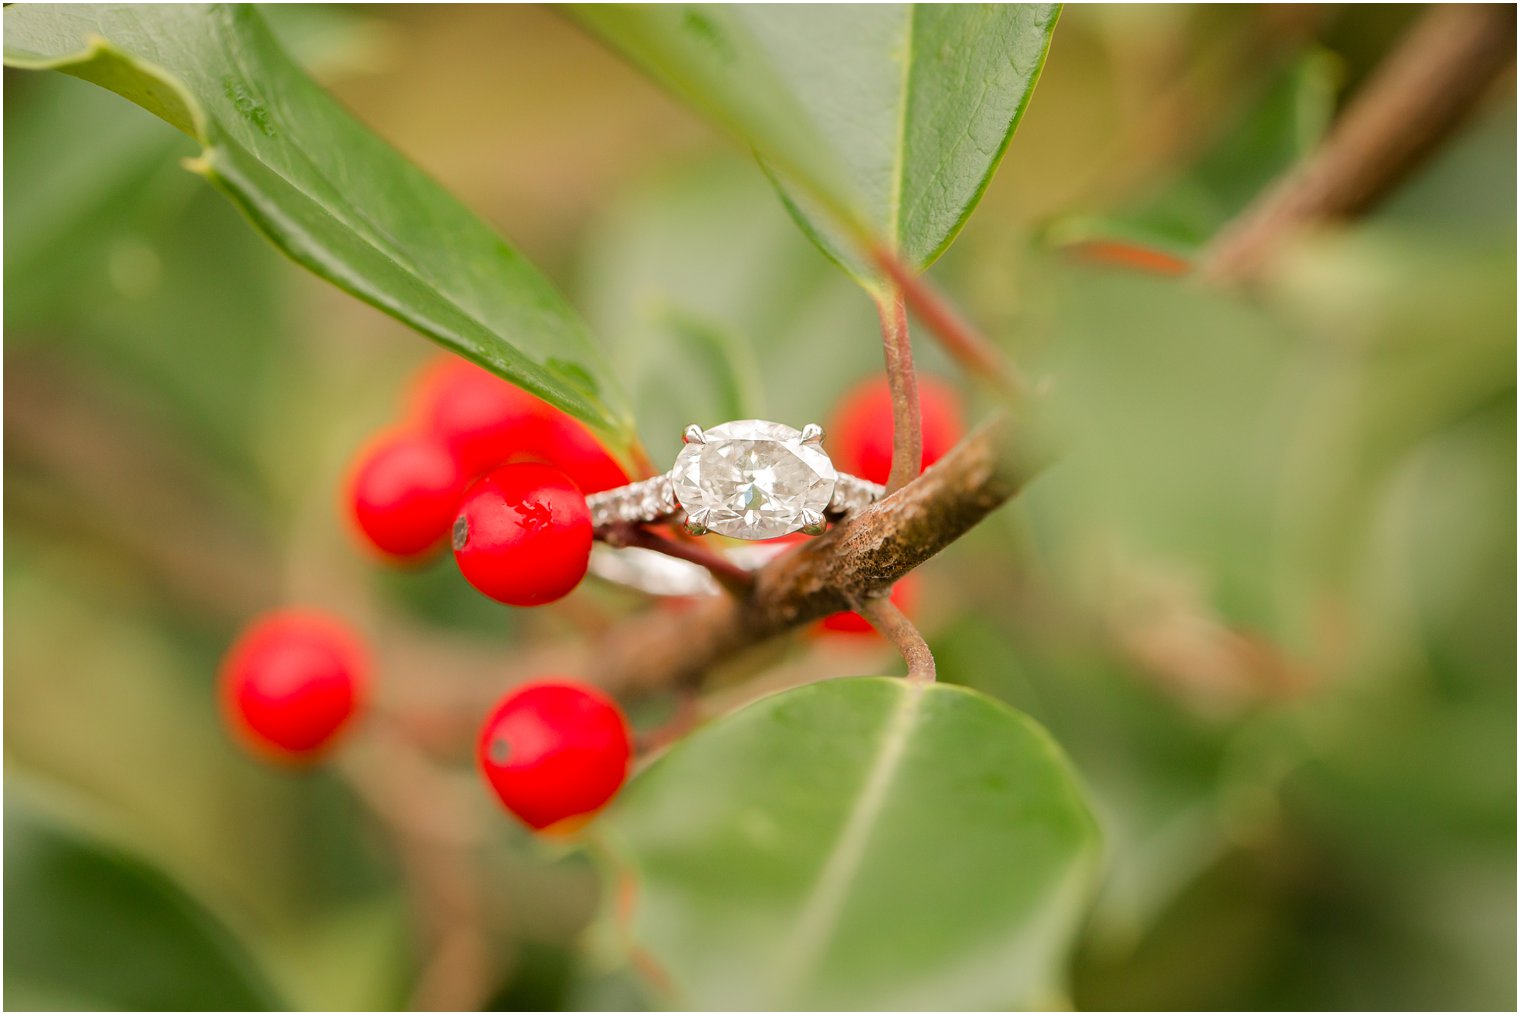 Engagement ring on holly tree branch